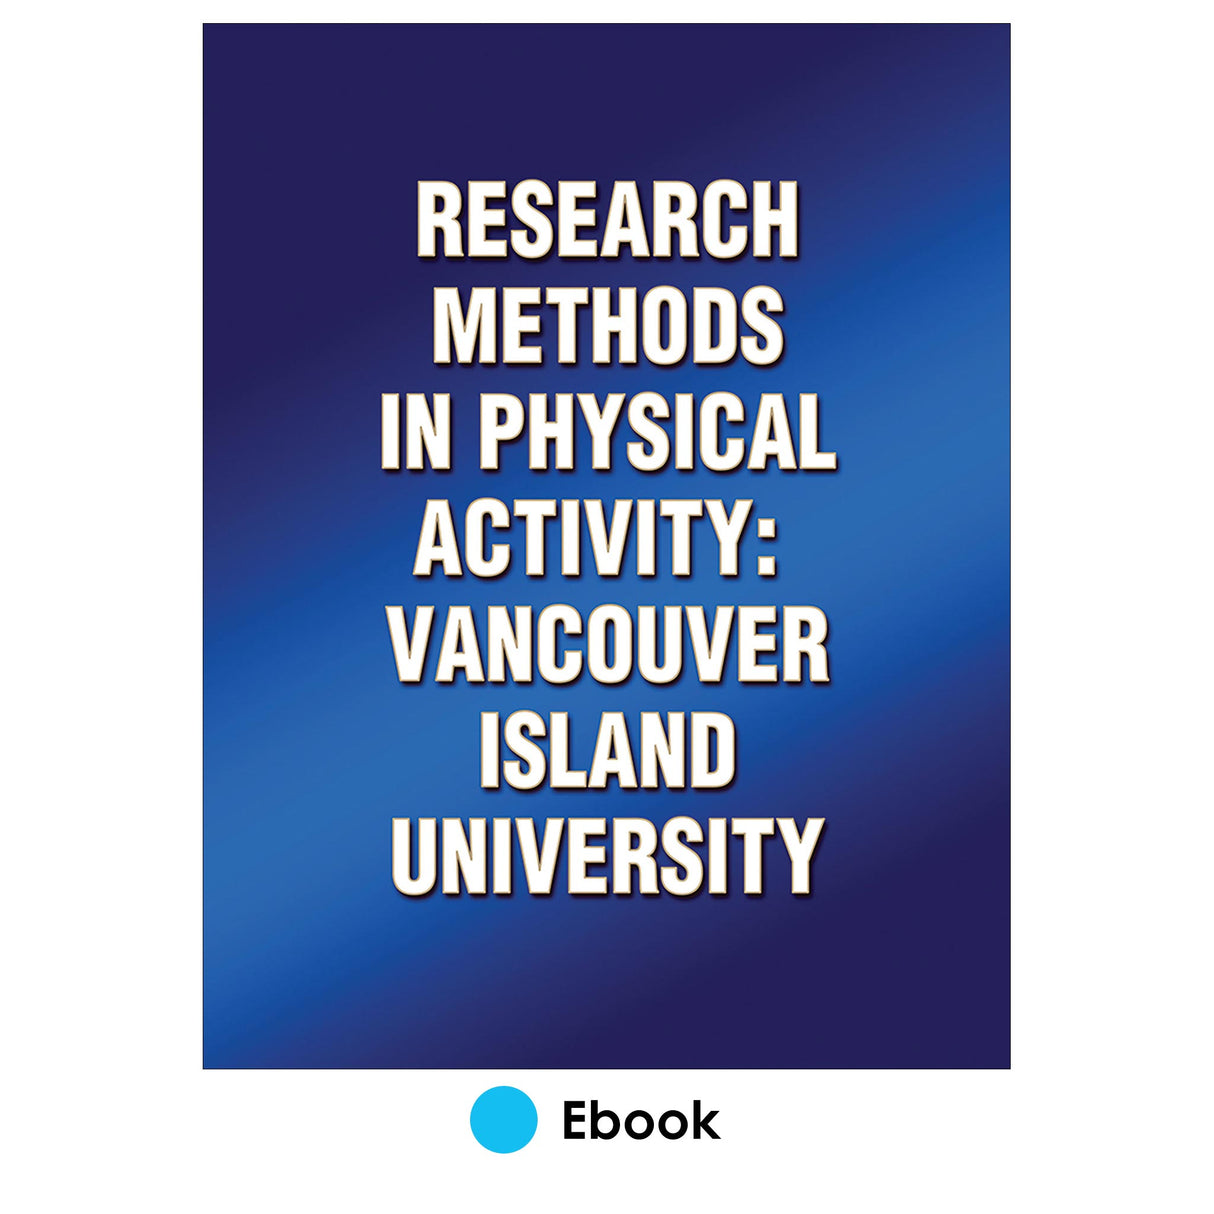 Research Methods in Physical Activity: Vancouver Island University